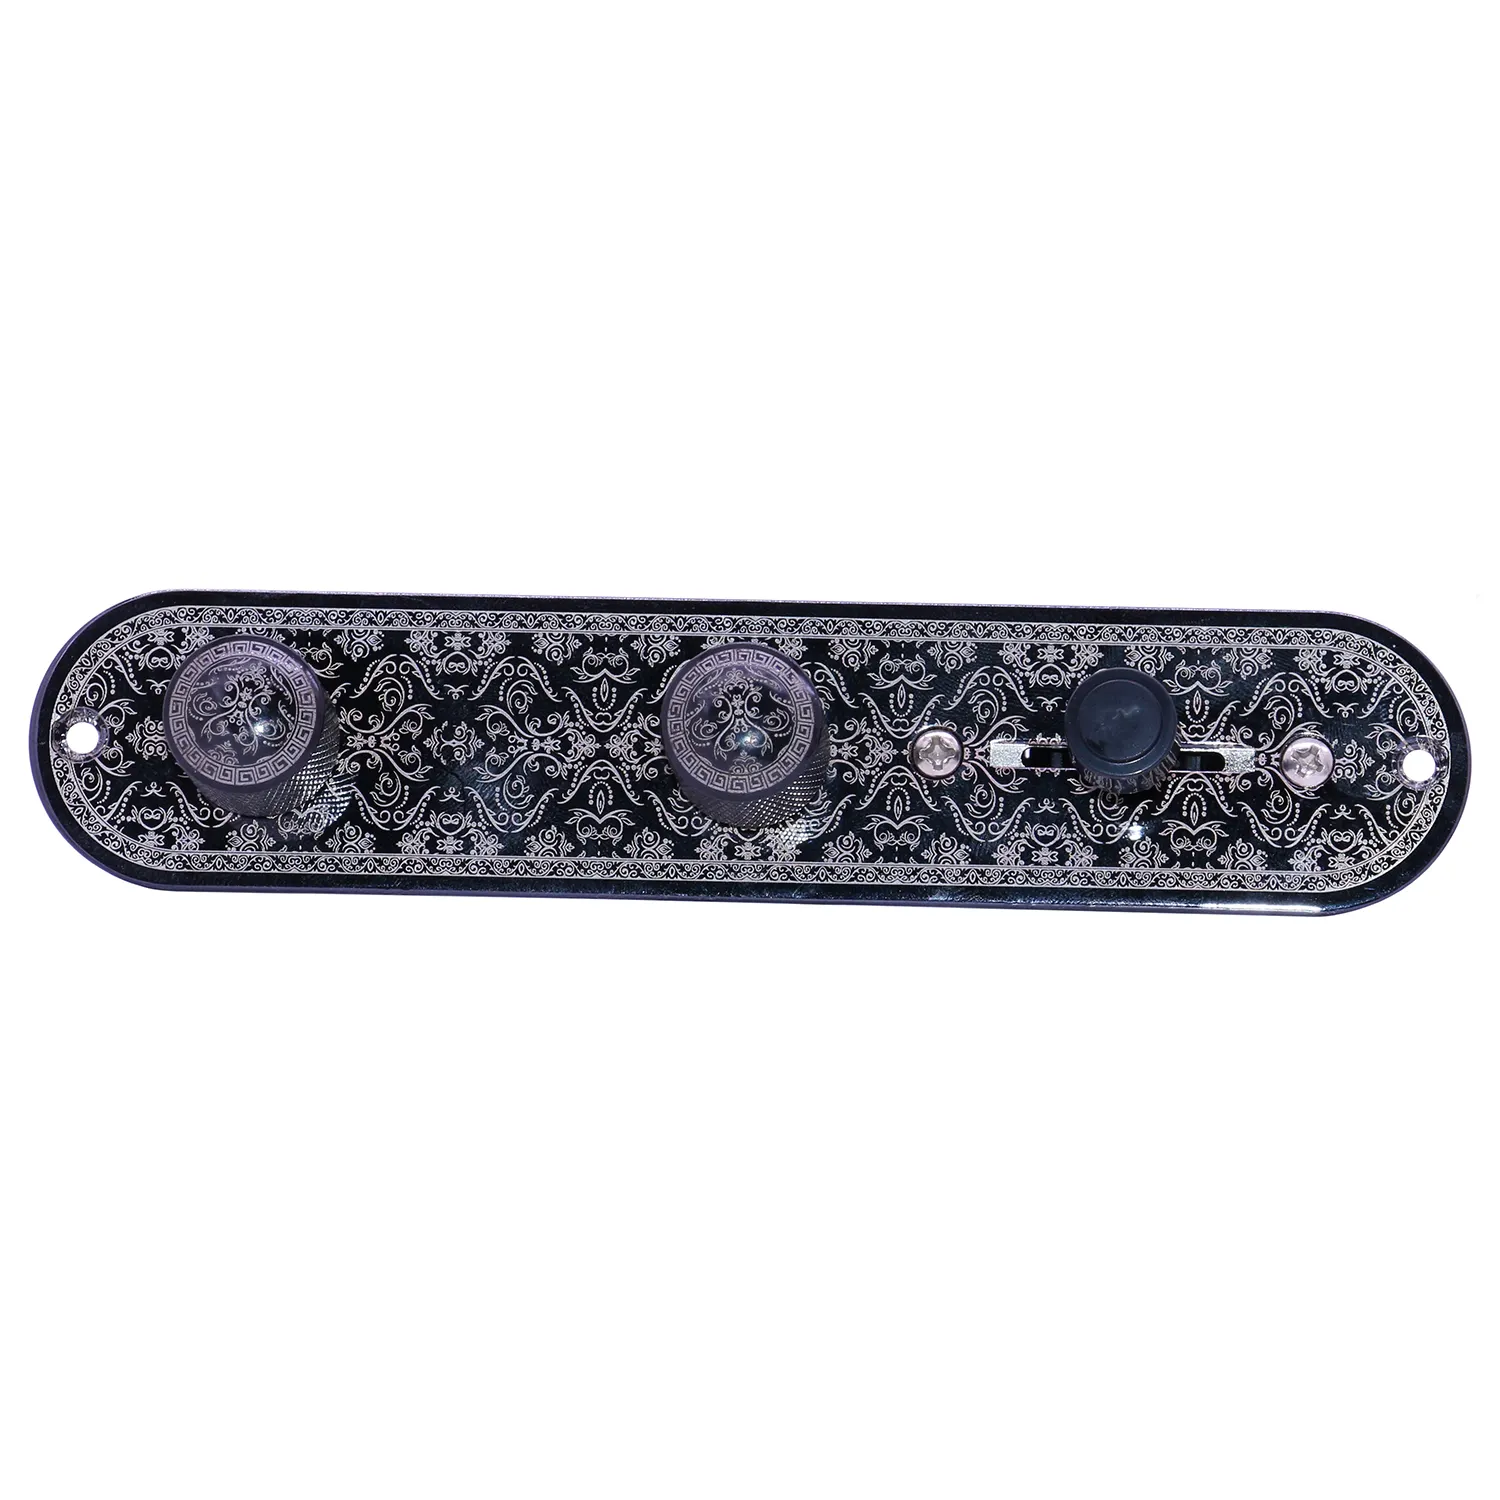 wholesale Fully Loaded Prewired Control Plate Guitar Pre-wired Control Plate with wiring harness for TL Electric Guitar Parts